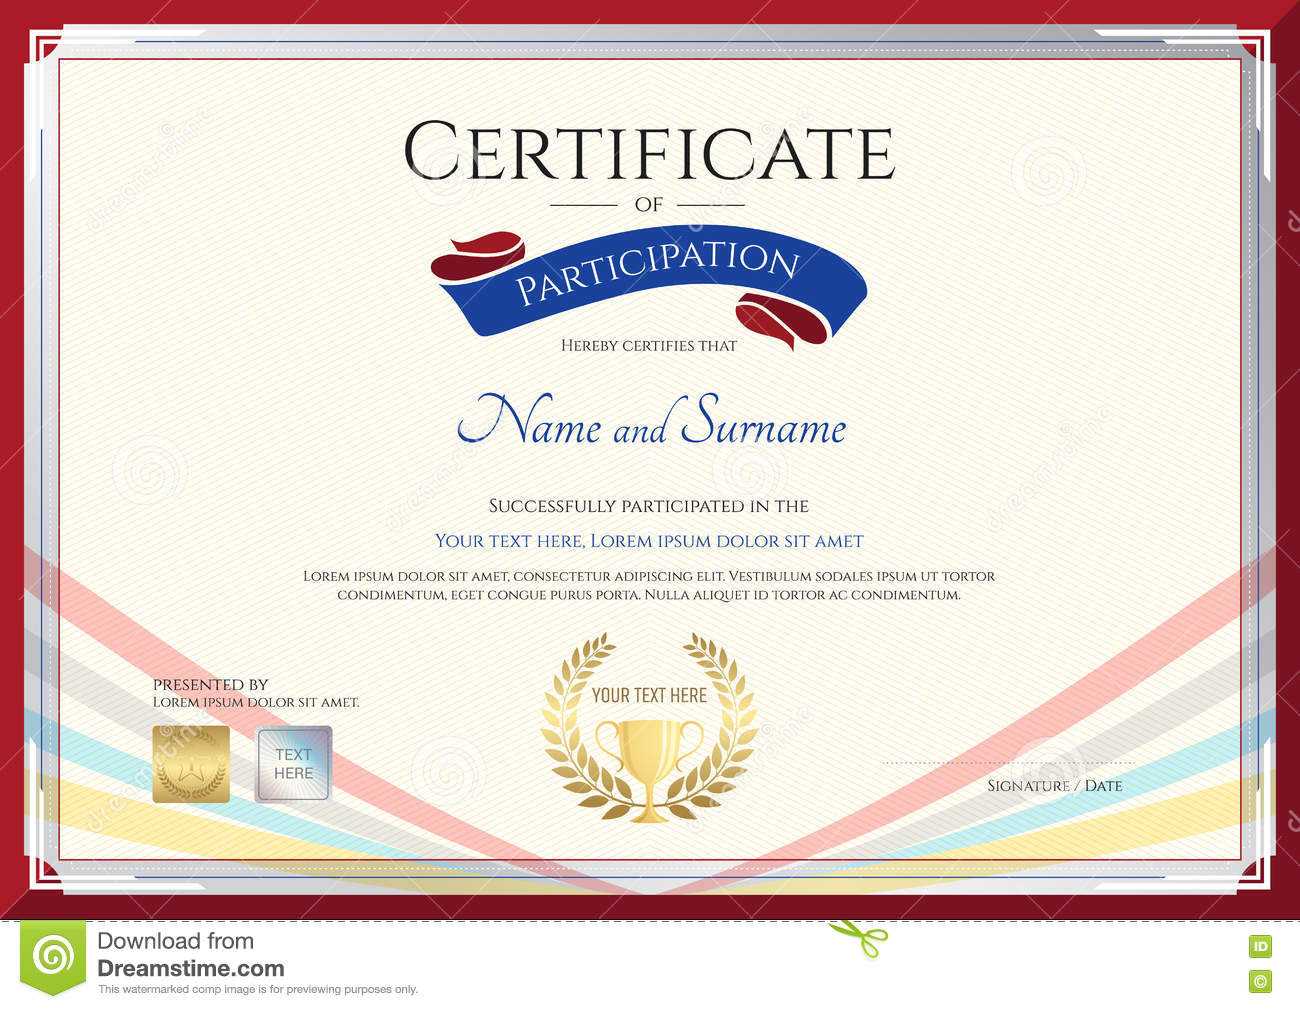 Certificate Template For Achievement, Appreciation Or In International Conference Certificate Templates